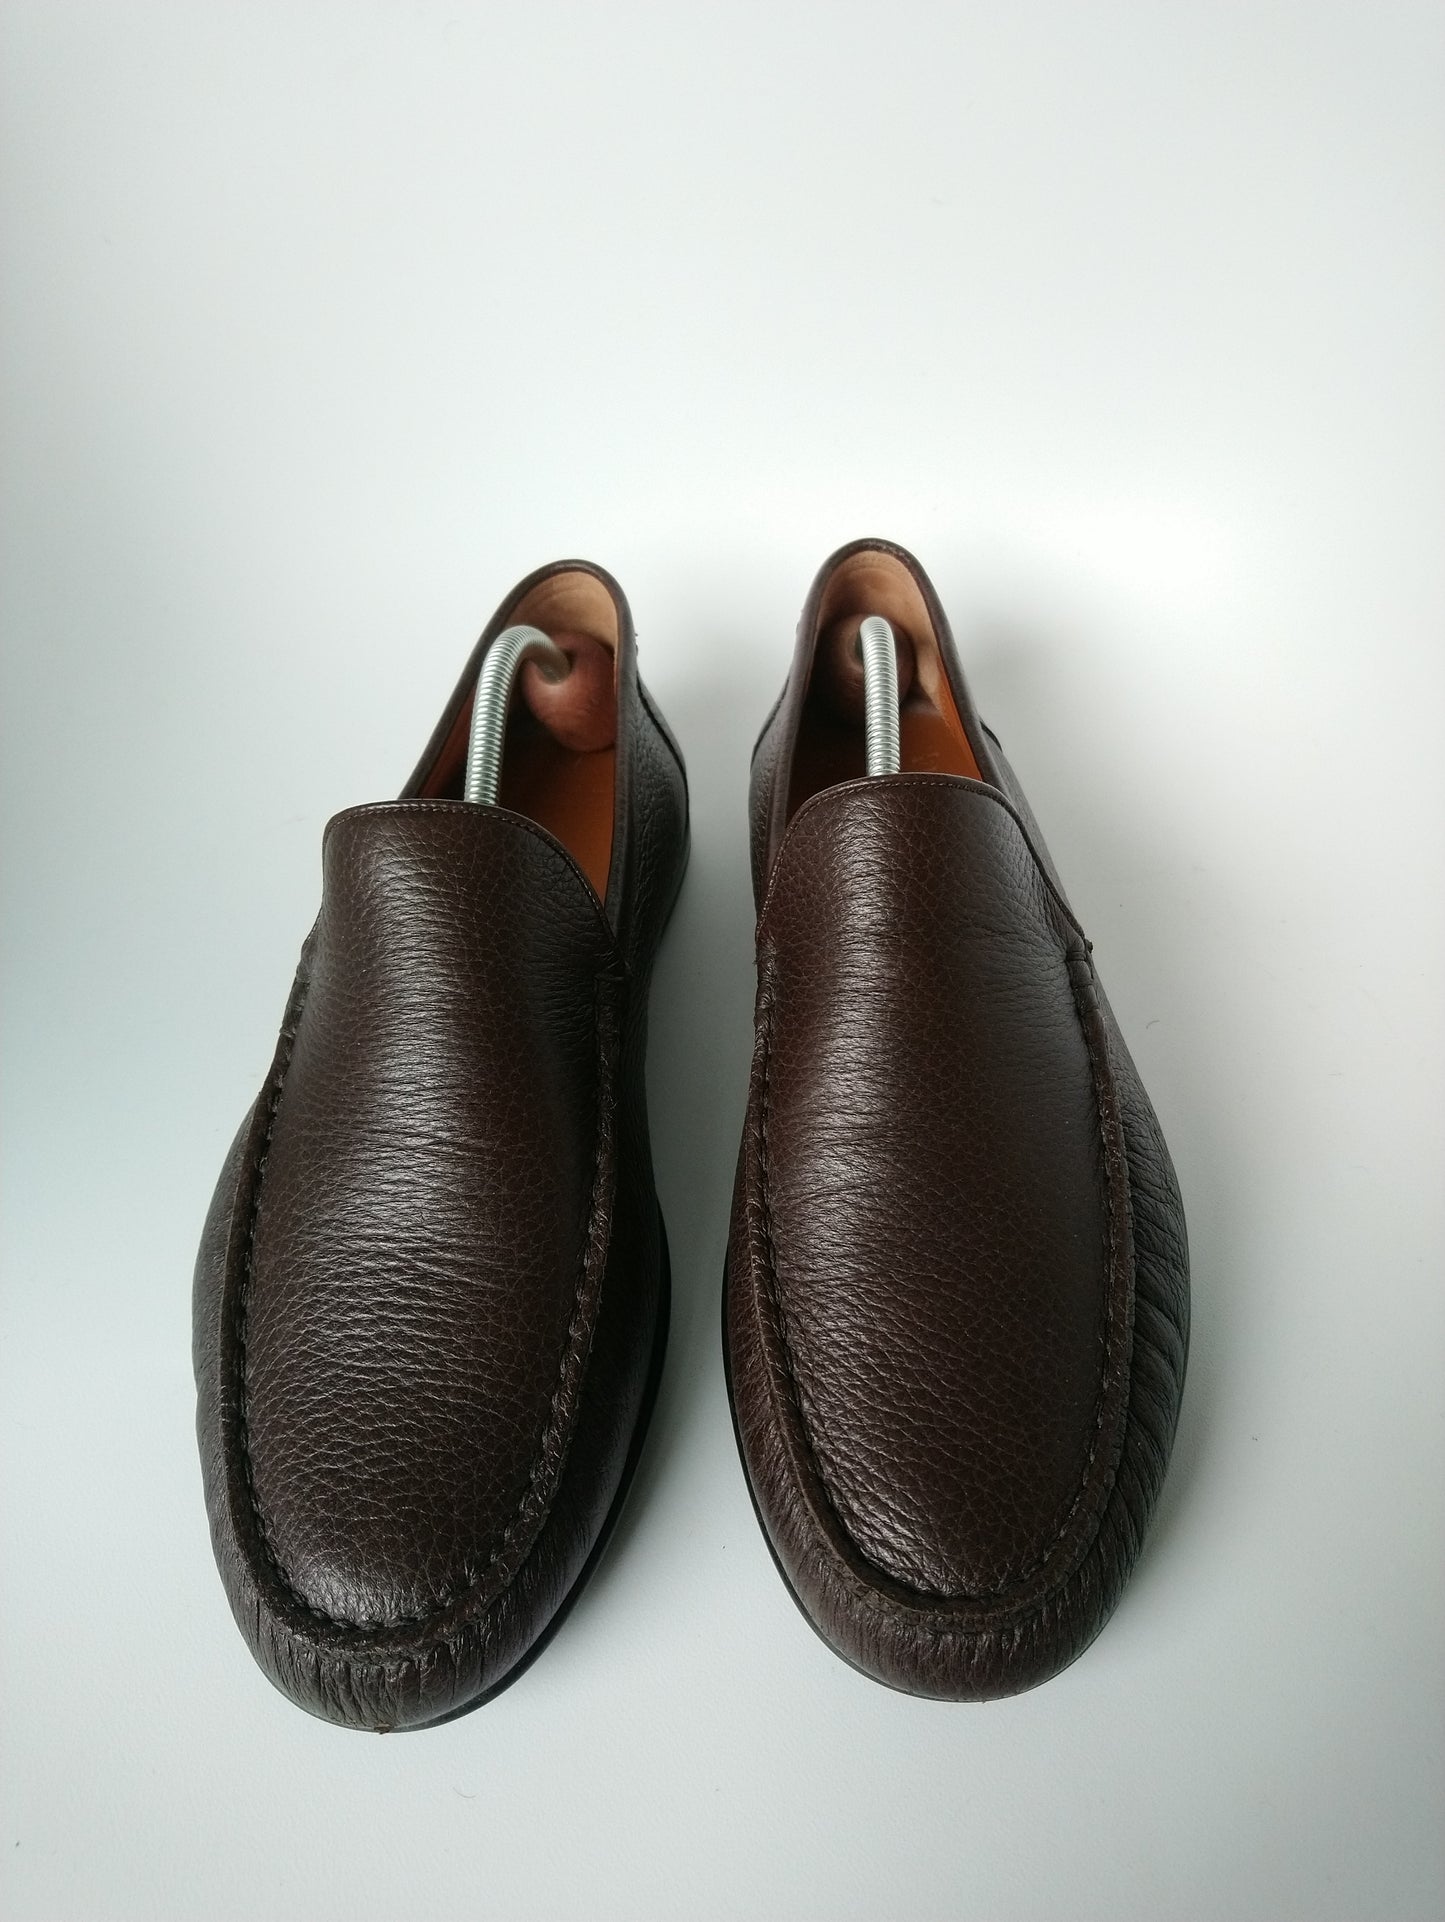 Bally learn moccasins. Dark brown colored. Size 39.5.